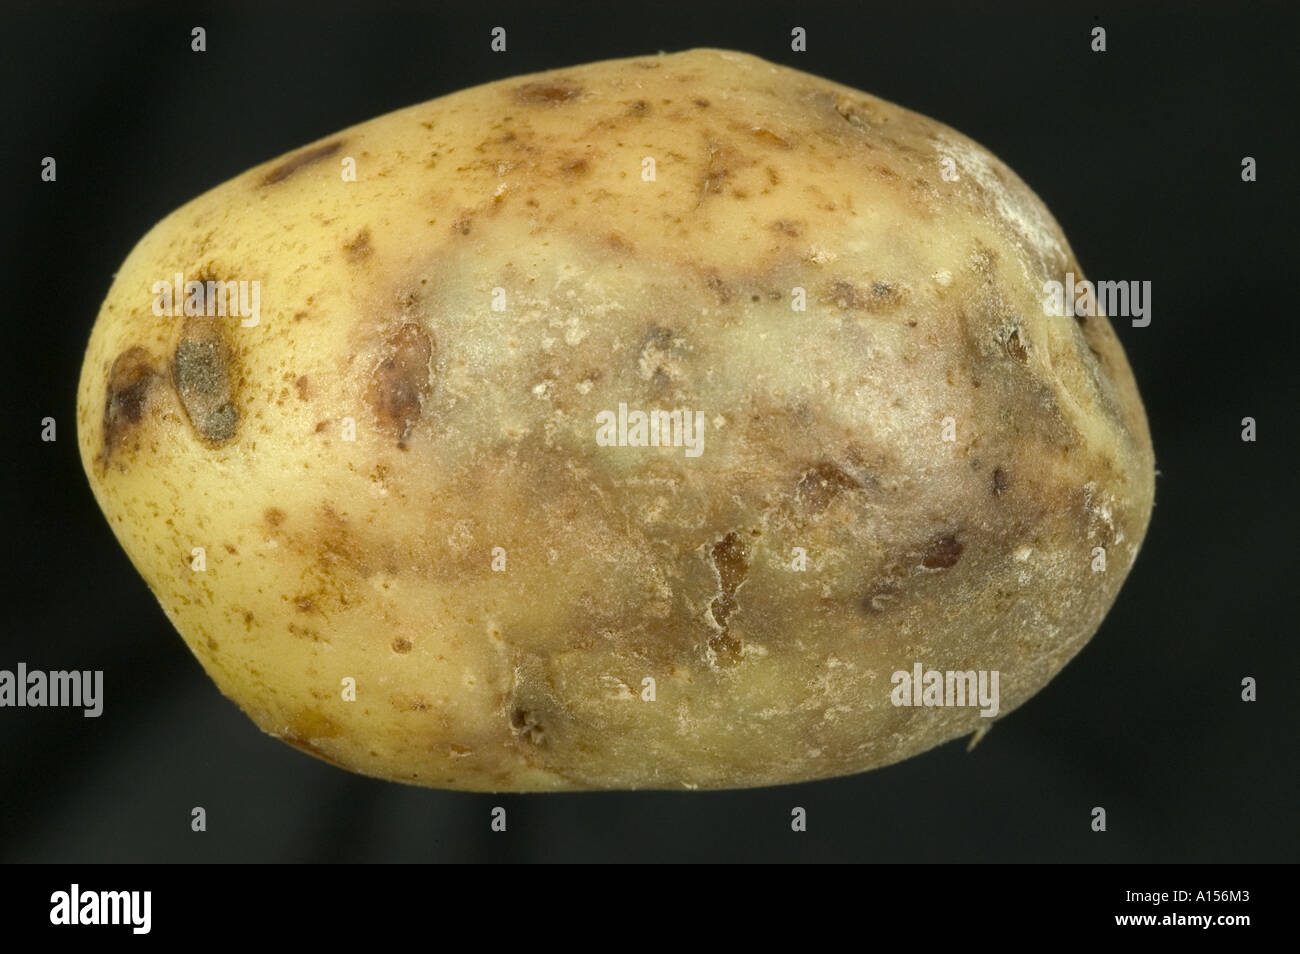 Discolouration caused by late blight Phytophthora infestans infection in potato tuber Stock Photo